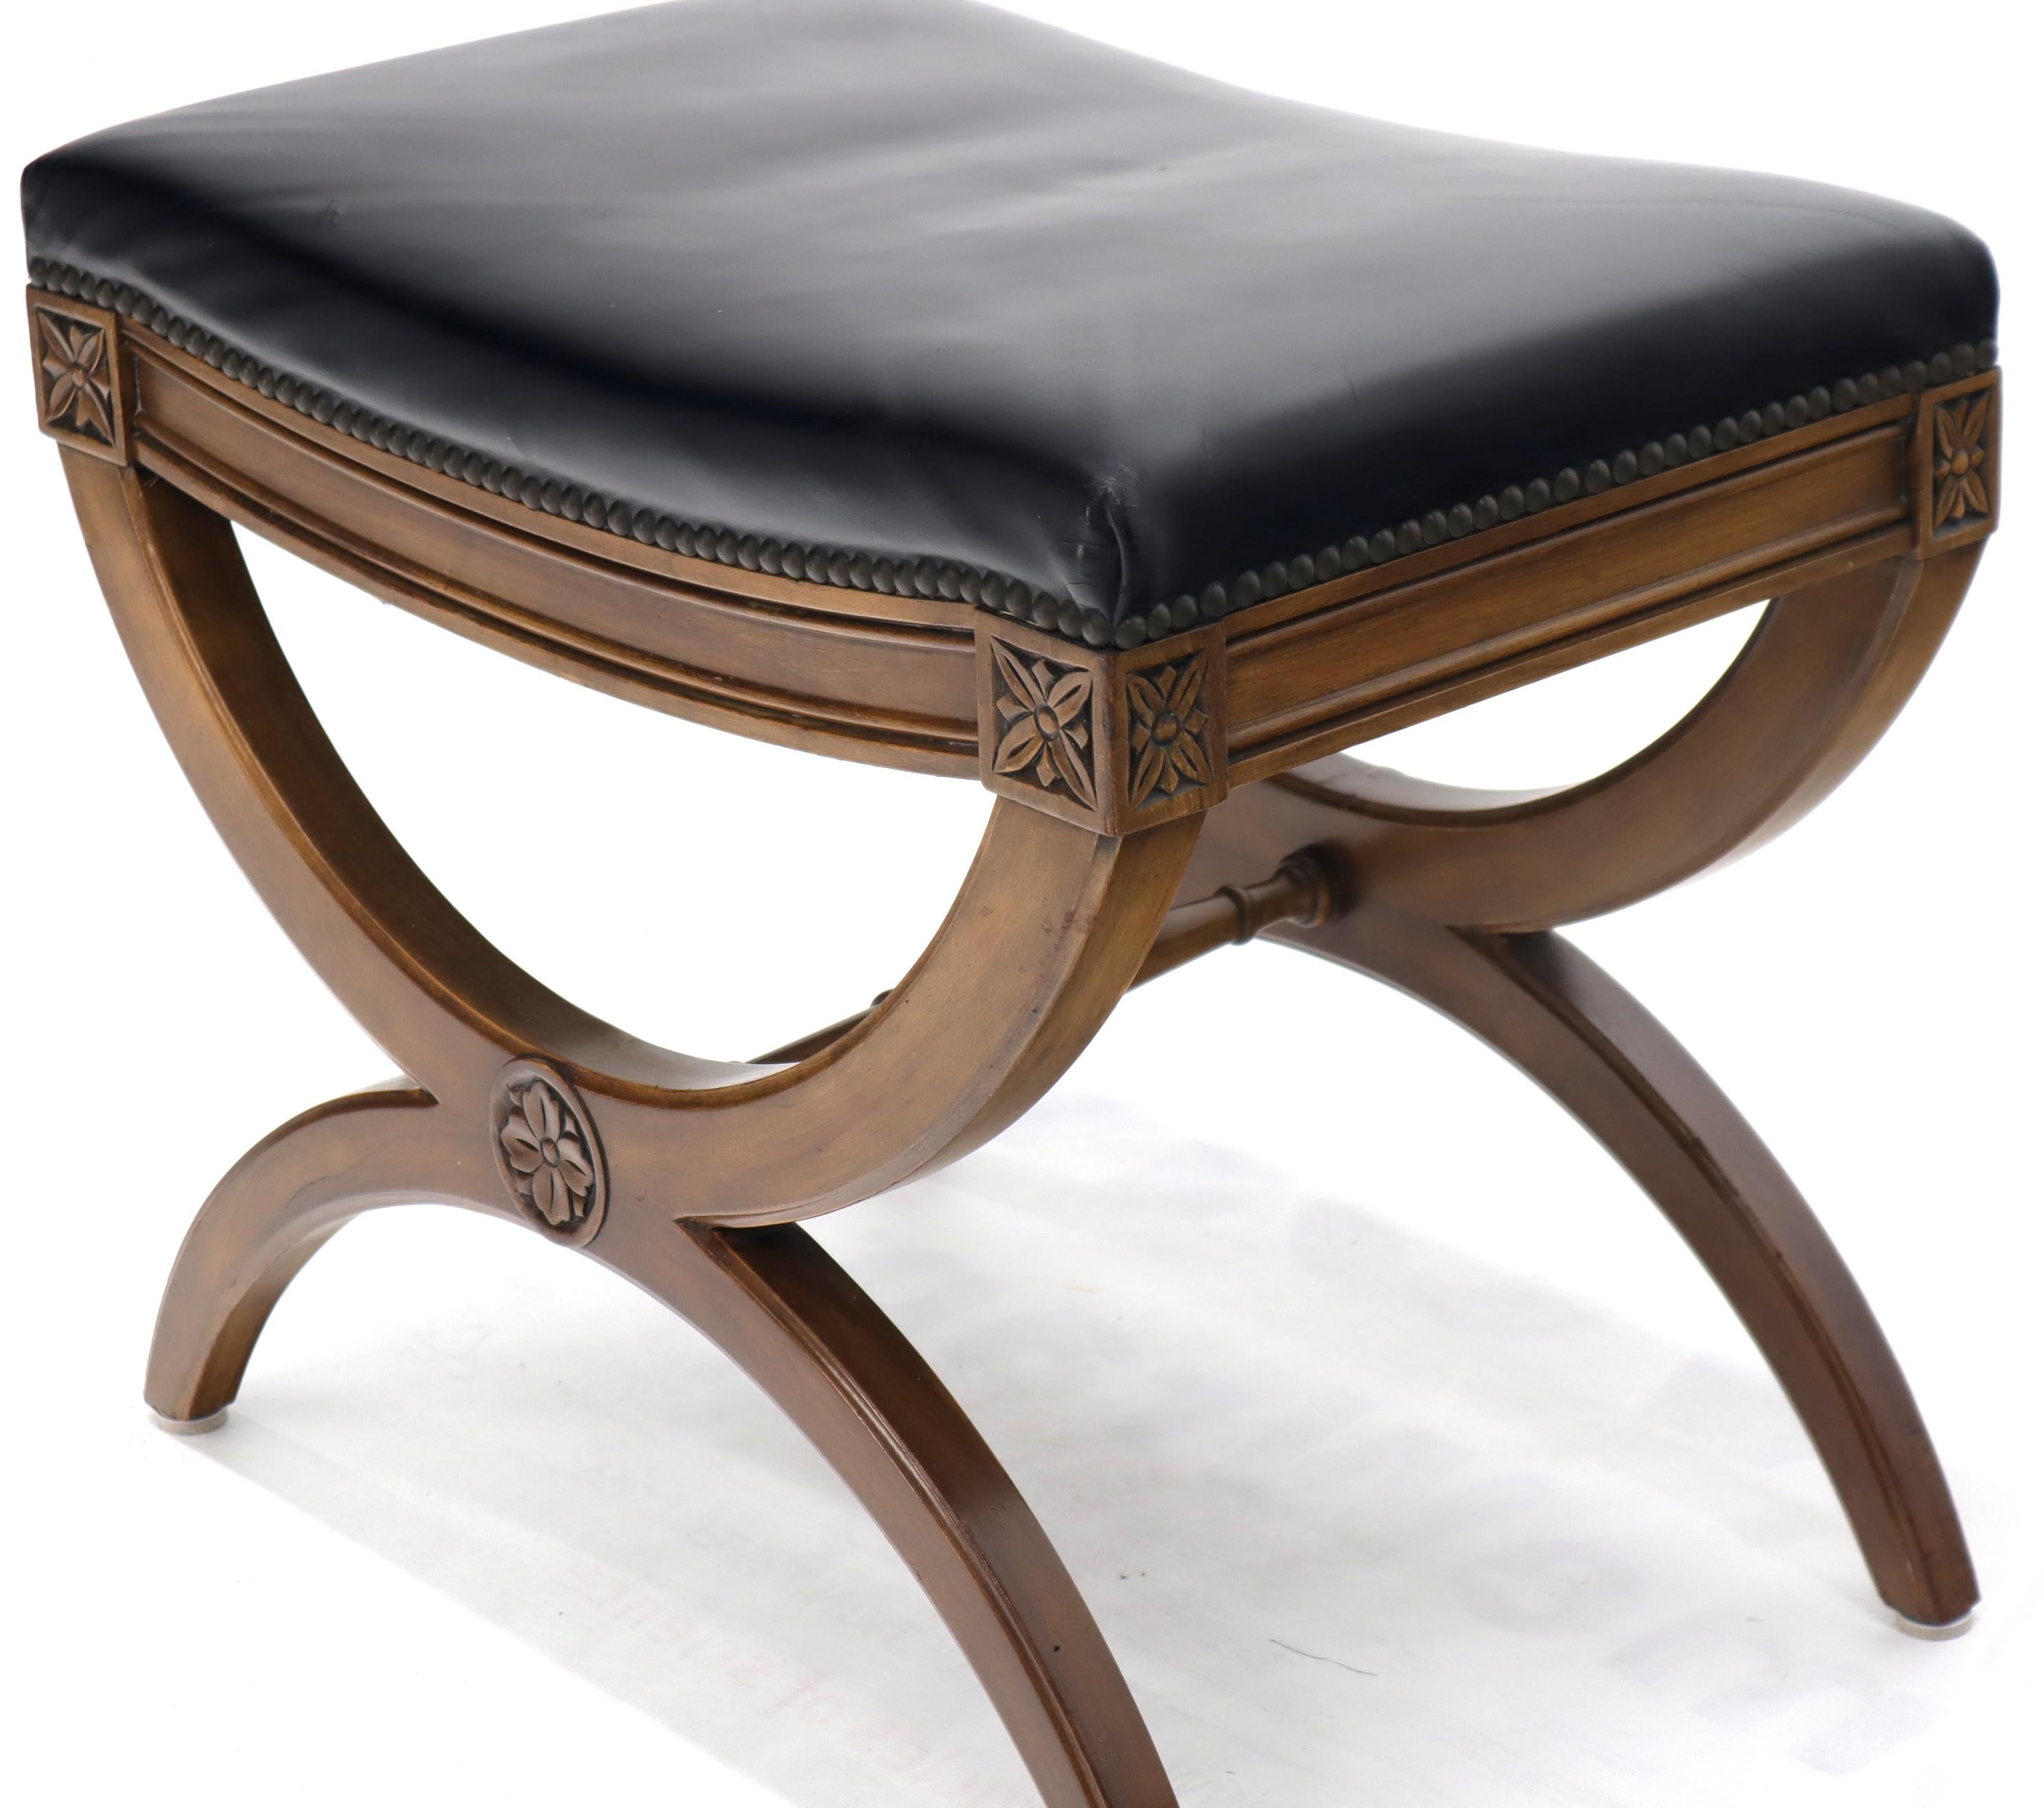 American Pair of Black Leather X-Bases Benches Ottomans Foot Stools by Kindel